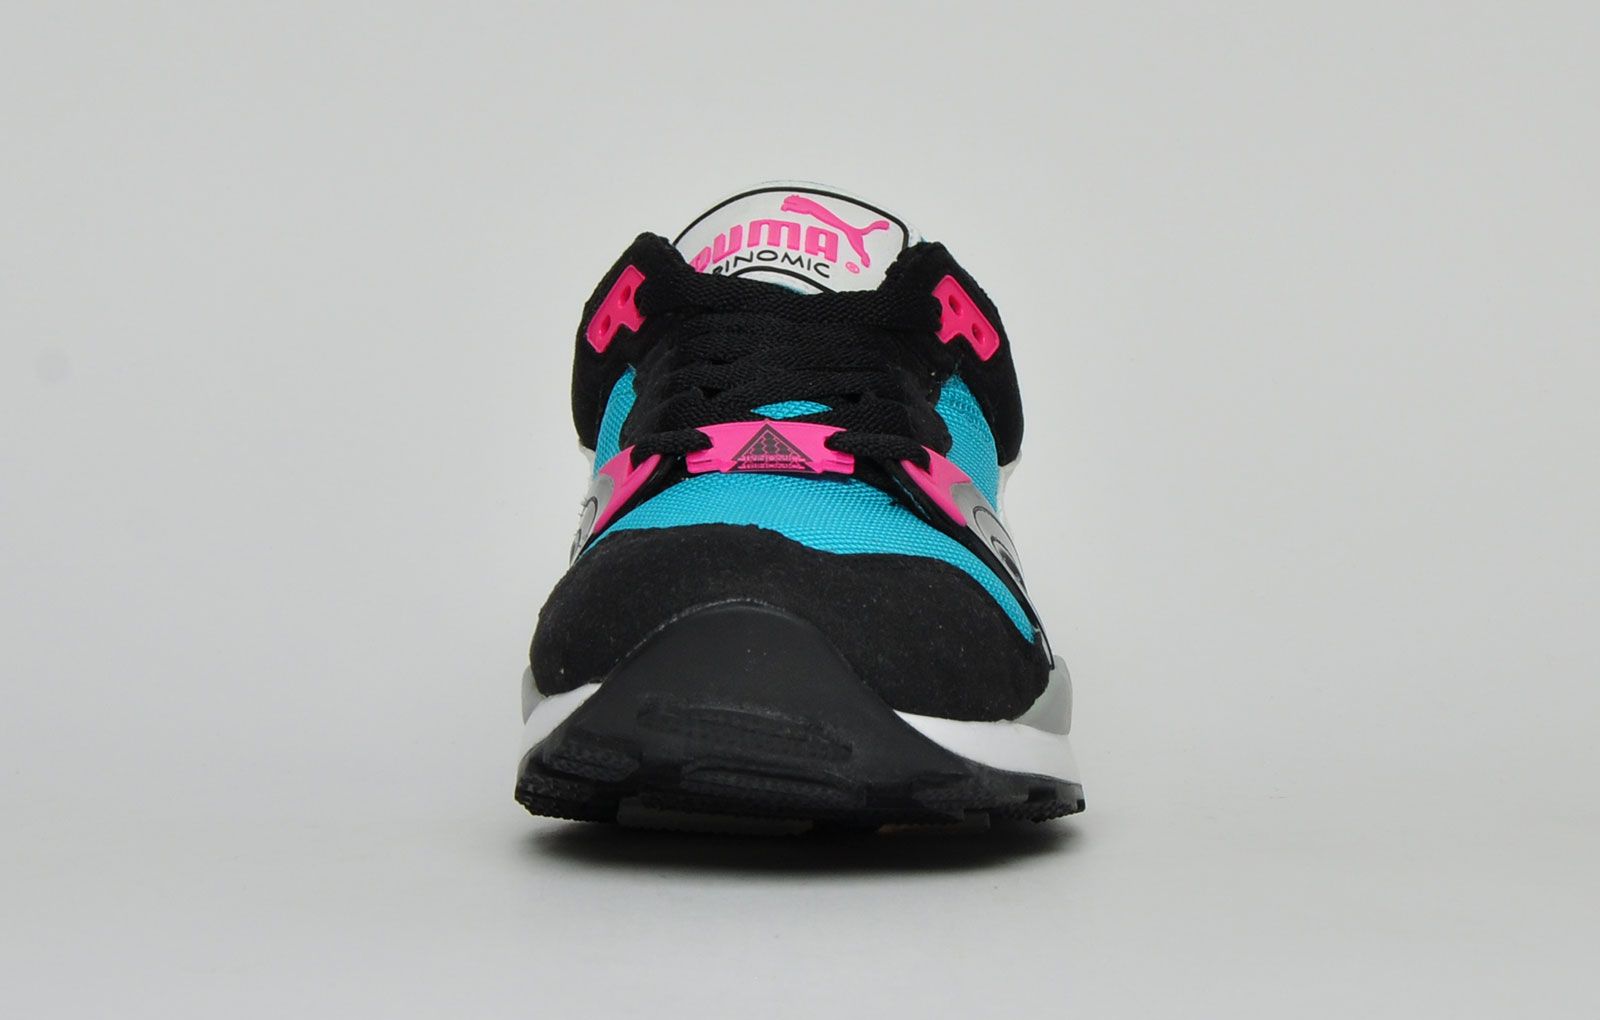 <p>Originally released in 1990, the Puma Trinomic was part of Puma’s early running range.</p> <p>The PUMA Trinomic XT2 Plus silhouette features a mix of synthetic suede, mesh and other materials providing a stylish and practical trainer that won’t let you down. Designed with an integrated lacing system and a forefoot saddle that adds durability and support for long lasting comfort, accompanied by a reinforced heel to provide a safe and secure fit.</p> <p>Designed with a treaded bottom for optimal grip over a variety of surfaces and with the visual Puma Trinomic clearly visible in the sole this is a cool retro running trainer which delivers on all fronts no matter whether you’re in the gym or just using for on trend casual wear.</p> <p>- Textile/synthetic suede upper</p> <p>- Padded tongue and heel</p> <p>- Eva midsole for increased cushioning</p> <p>- Durable outsole with flex grooves for enhanced grip</p> <p>- Trinomic cushioning visible in sole</p> <p>- Puma branding throughout<br></p>